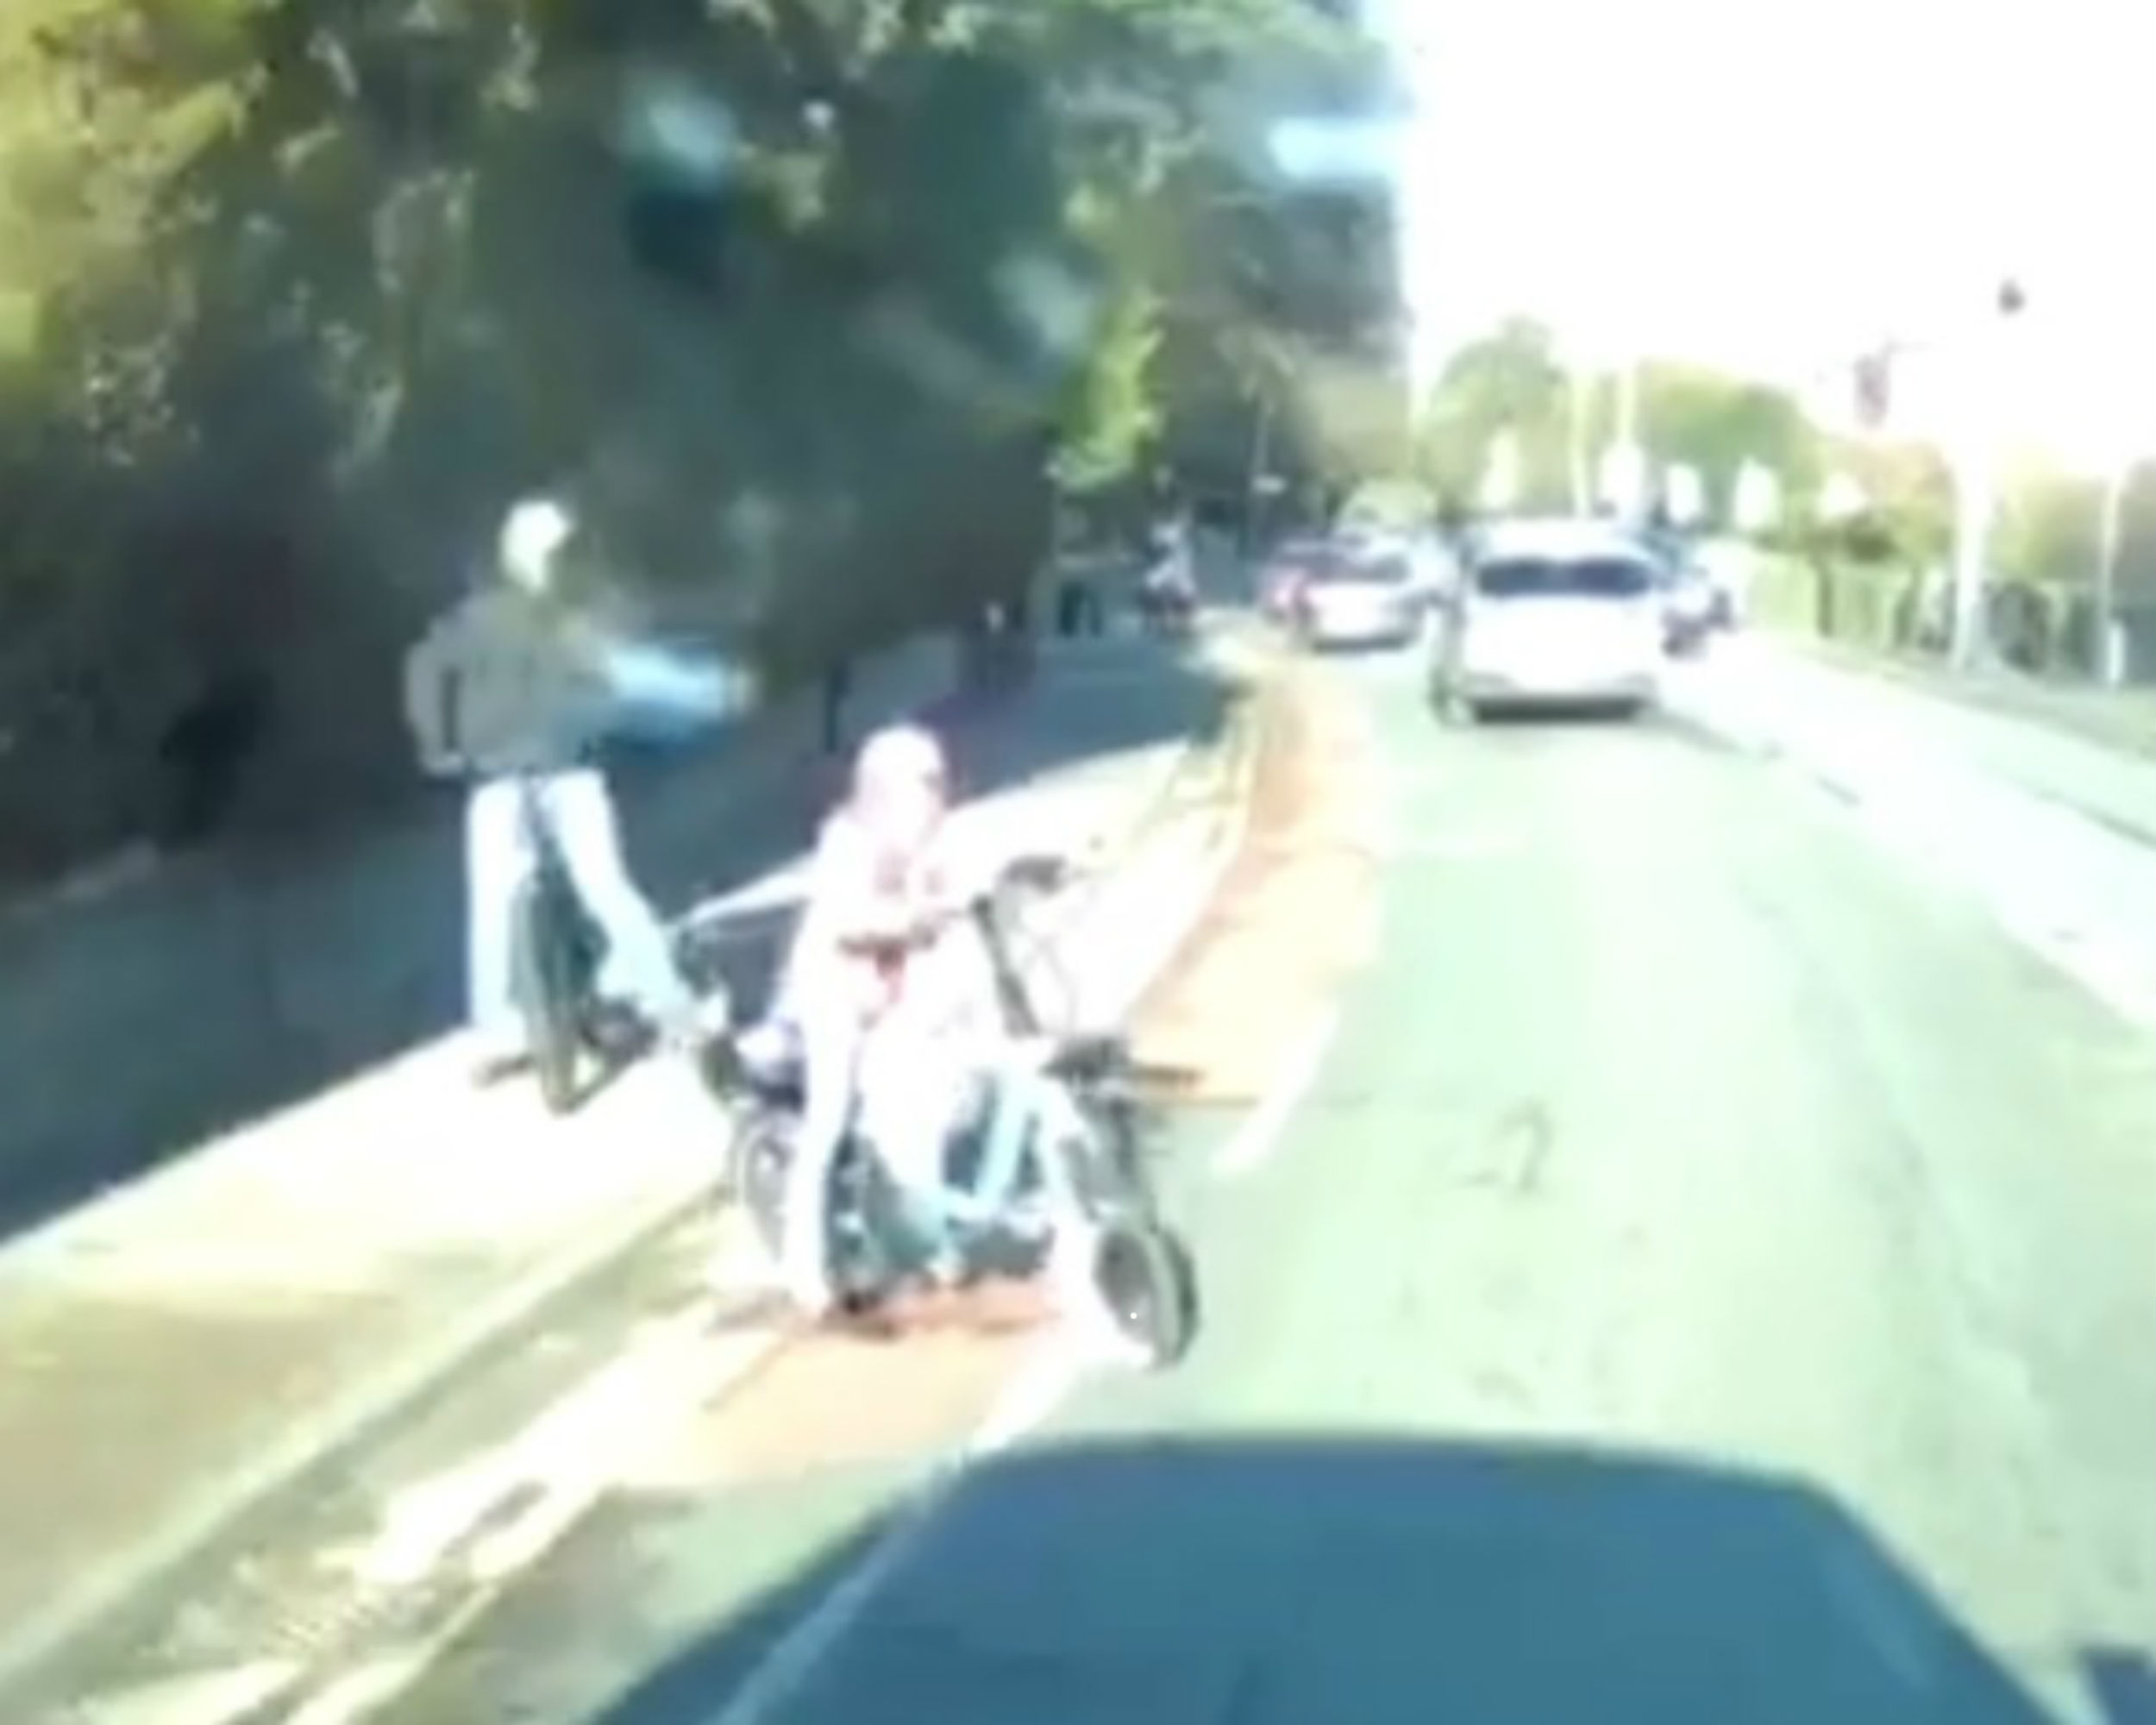 As her bike careers off the road, the driver makes a sudden stop and caught the near miss on his dashcam